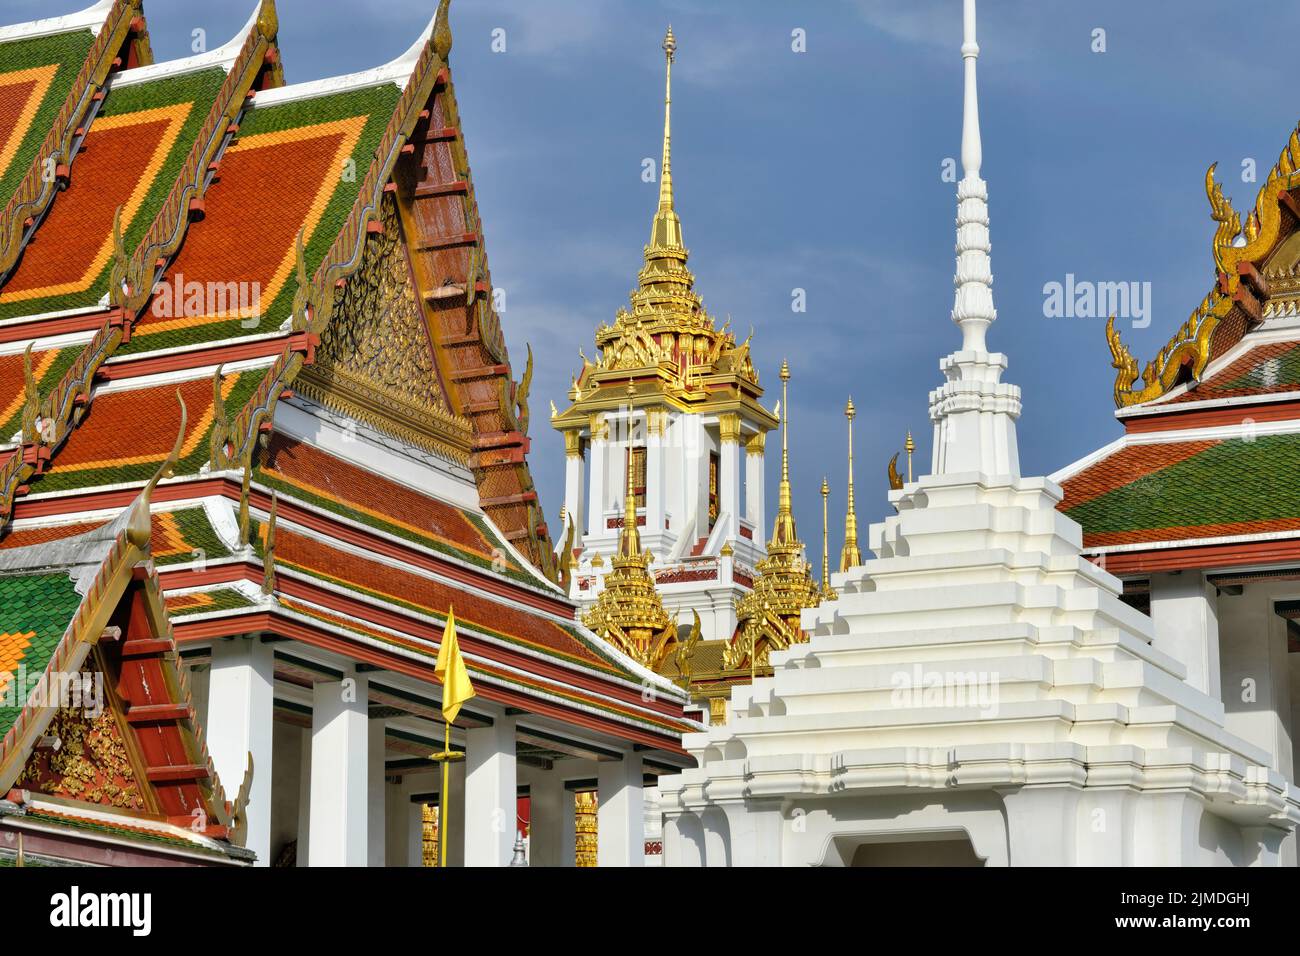 View of (temple) Wat Rajanadta (Ratchanadta) in Bangkok, Thailand, with the gold-plated Lohaprasad building in the middle Stock Photo